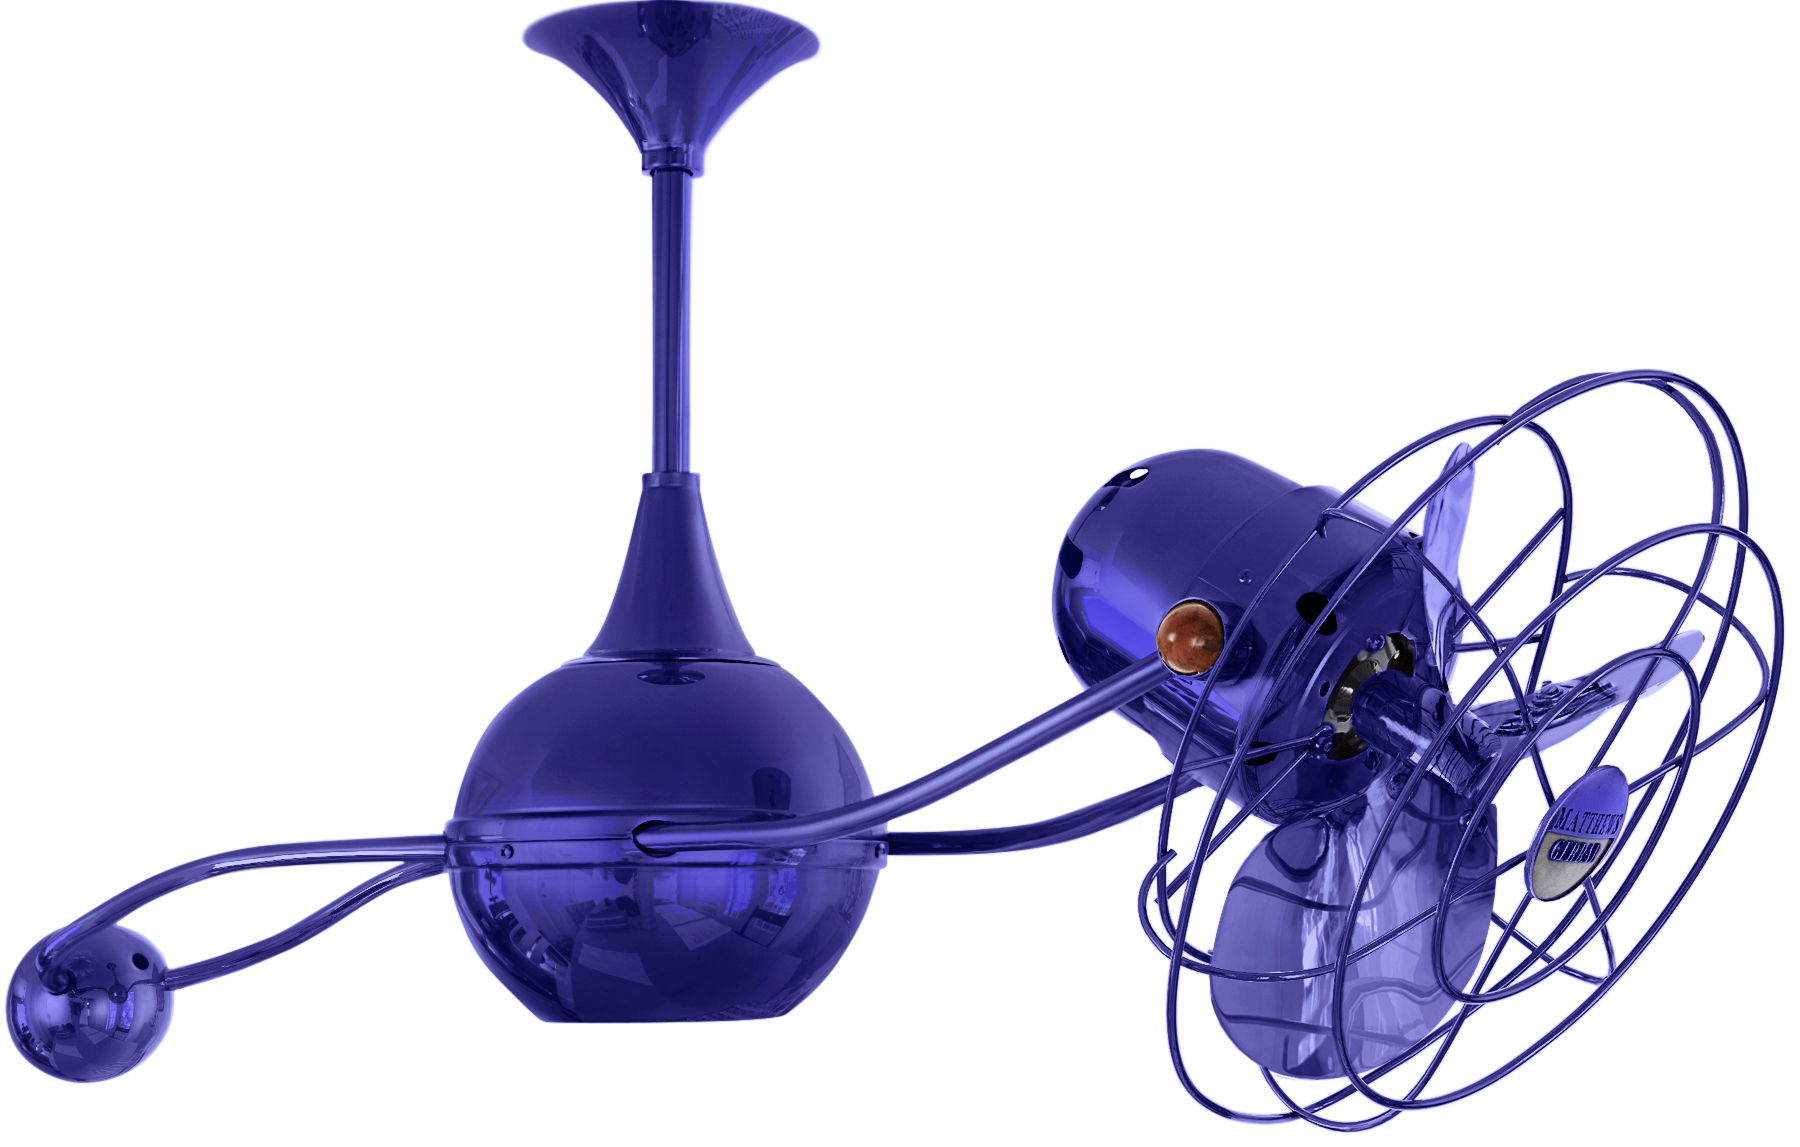 Brisa 2000 ceiling fan in blue / safira finish with metal blades in decorative cage made by Matthews Fan Company.